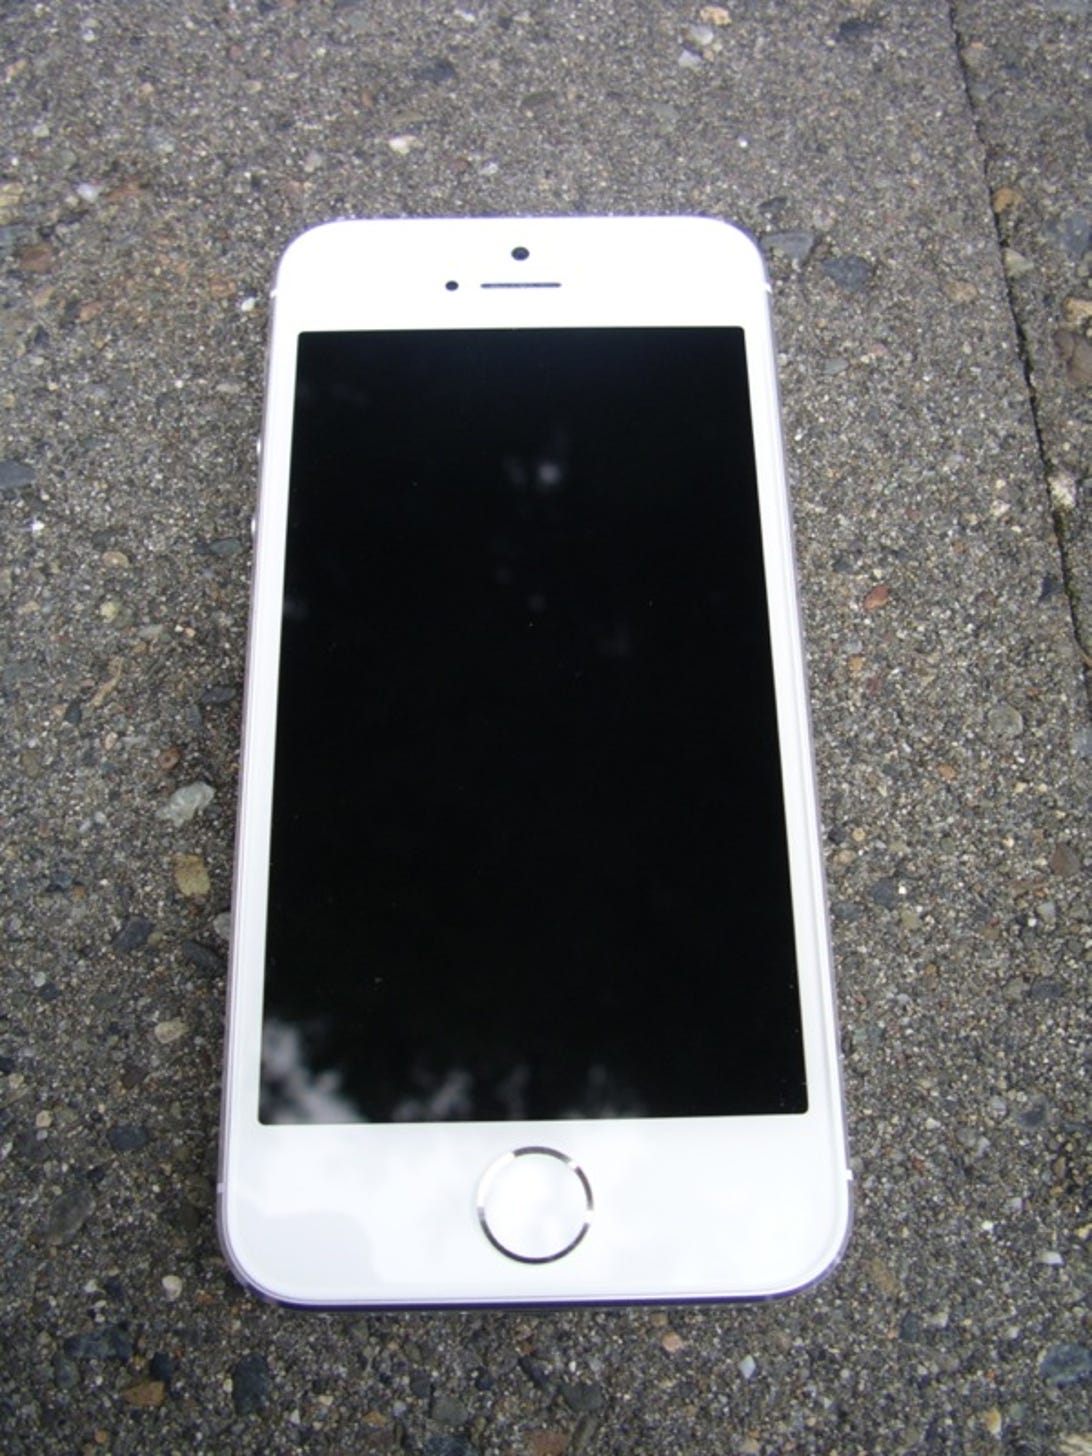 Circus geweer Woud Apple iPhone 5s review: The best gets better | ZDNet